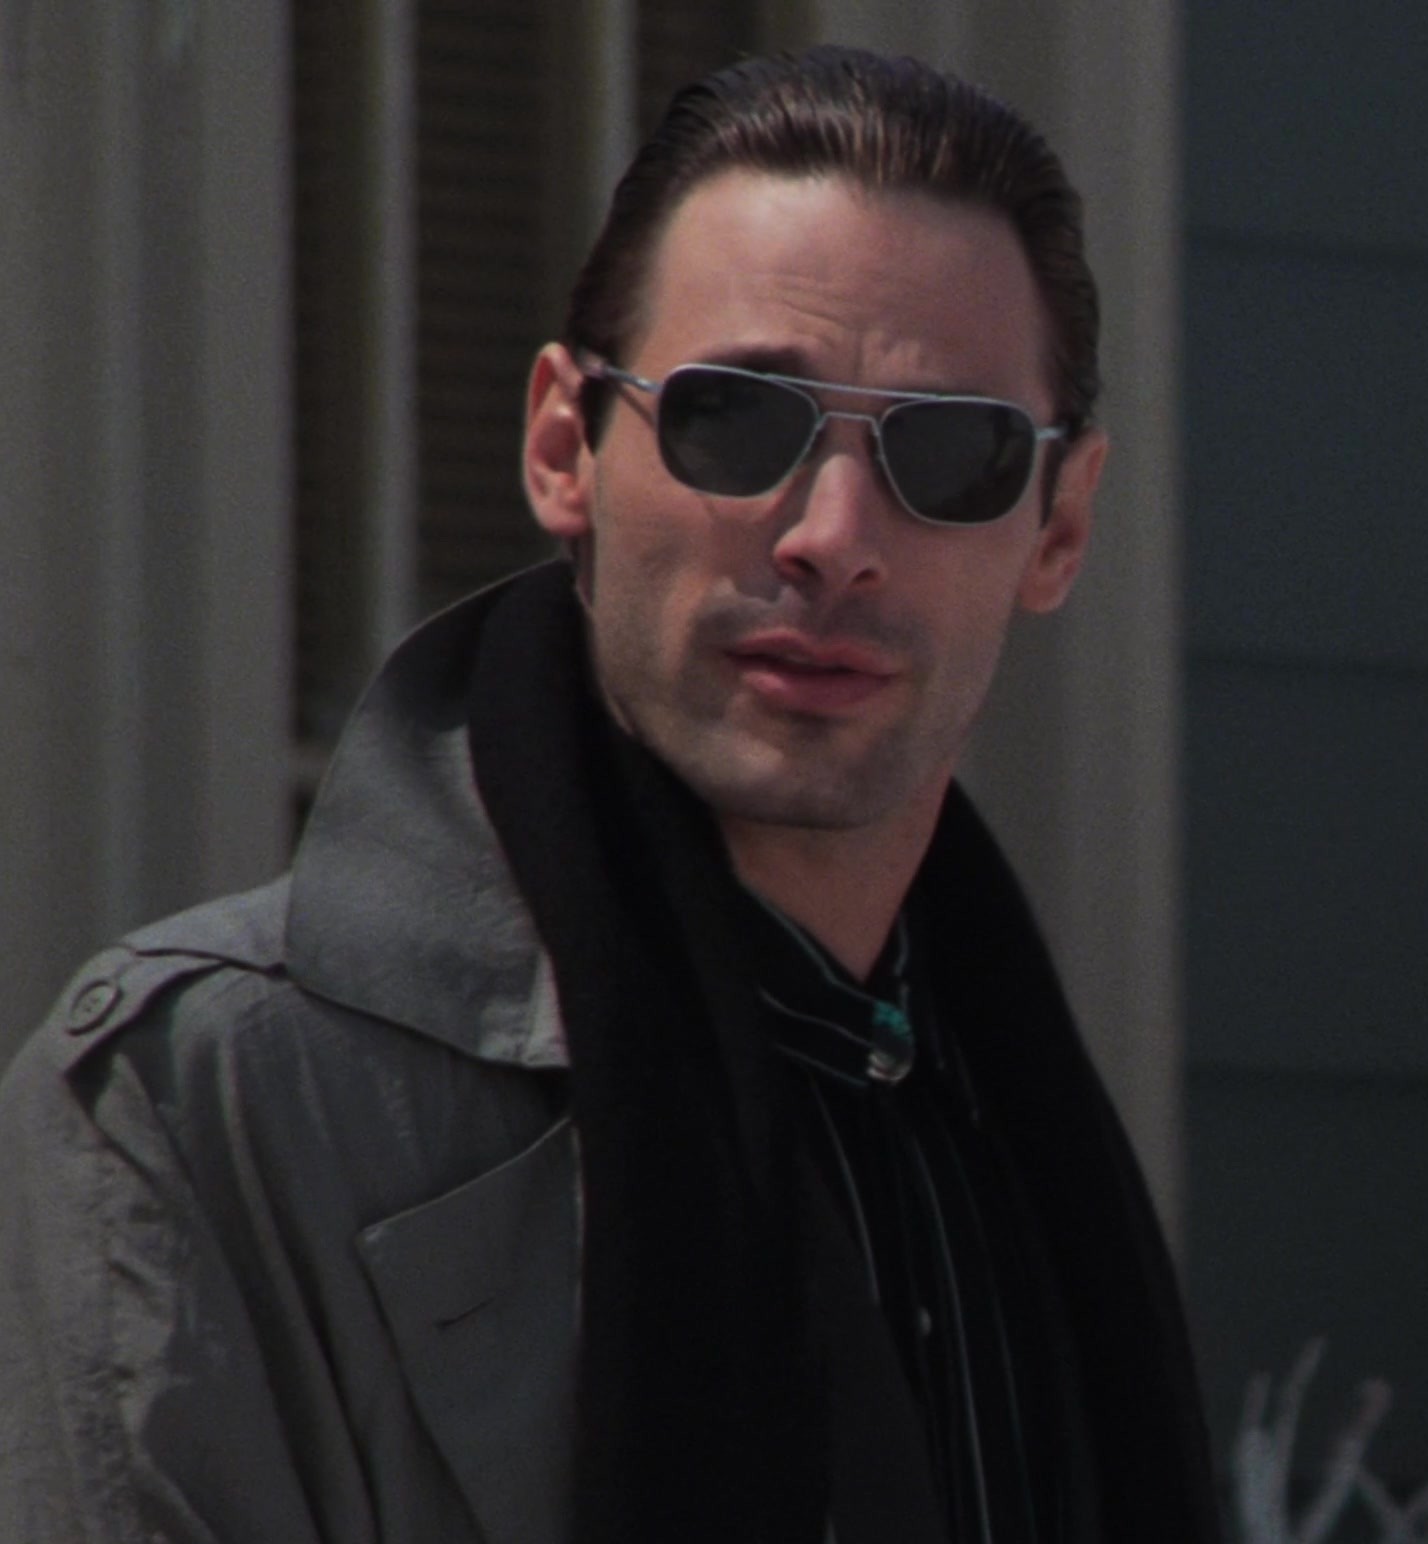 Worn on National Lampoon's Christmas Vacation (1989) Movie - Aviator Sunglasses Worn by Nicholas Guest as Todd Chester